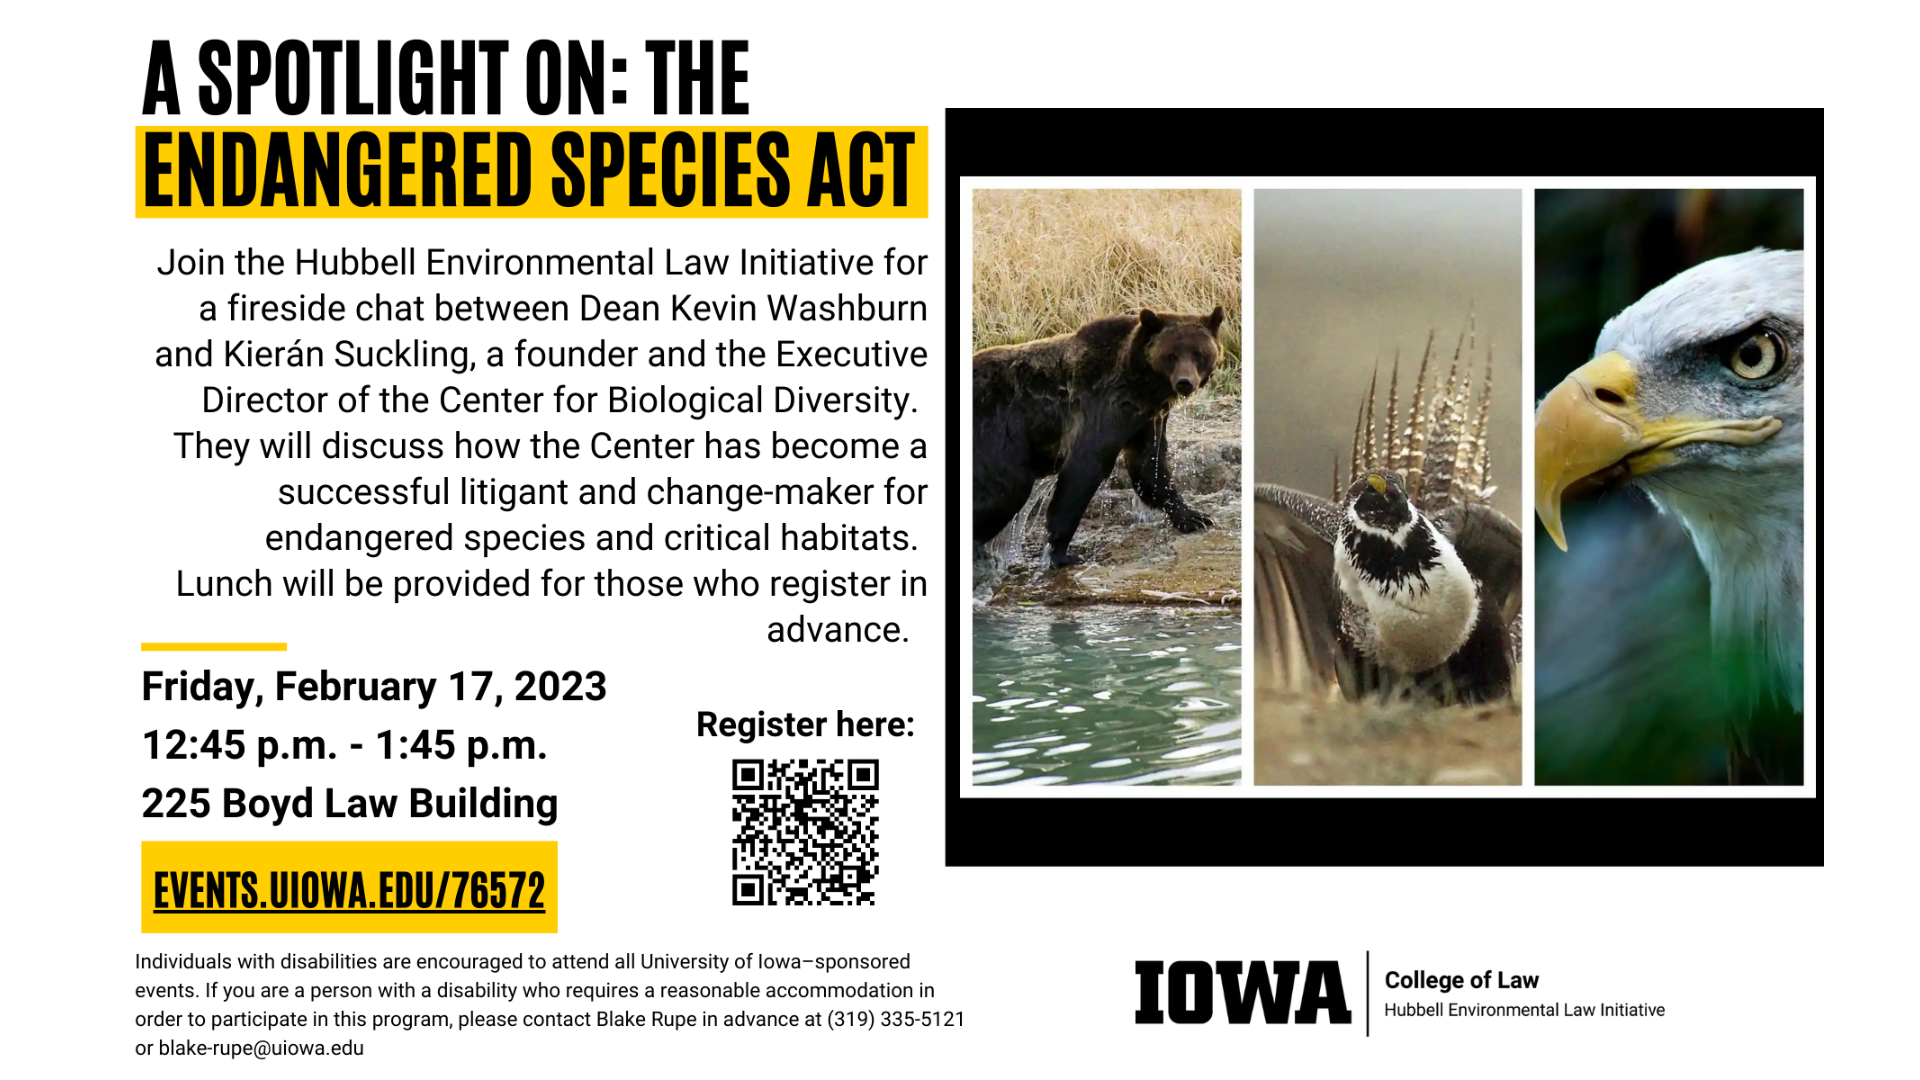 A spotlight on the Endangered Species Act. Join the Hubbell Environmental Law Initiative for a fireside chat between Dean Kevin Washburn and Kierán Suckling, a founder and the Executive Director of the Center for Biological Diversity. They will discuss how the Center has become a successful litigant and change-maker for endangered species and critical habitats. Lunch will be provided for those who register in advance. Friday, February 17, 2023. 12:45 PM to 1:45 PM. 225 Boyd Law Building. events.uiowa.edu/76572